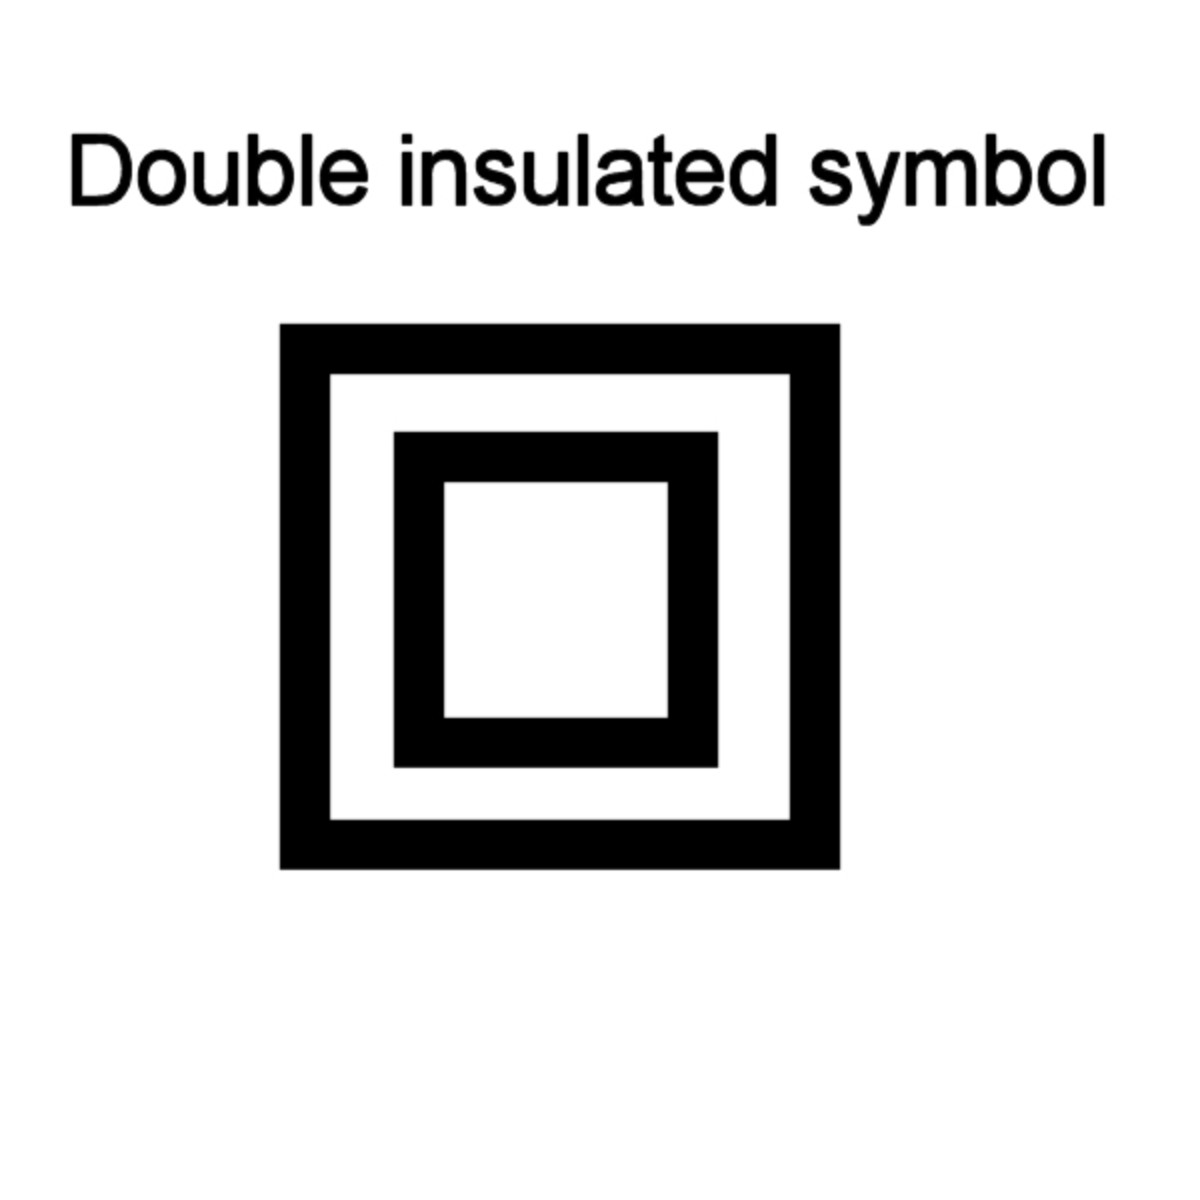 Double insulated symbol